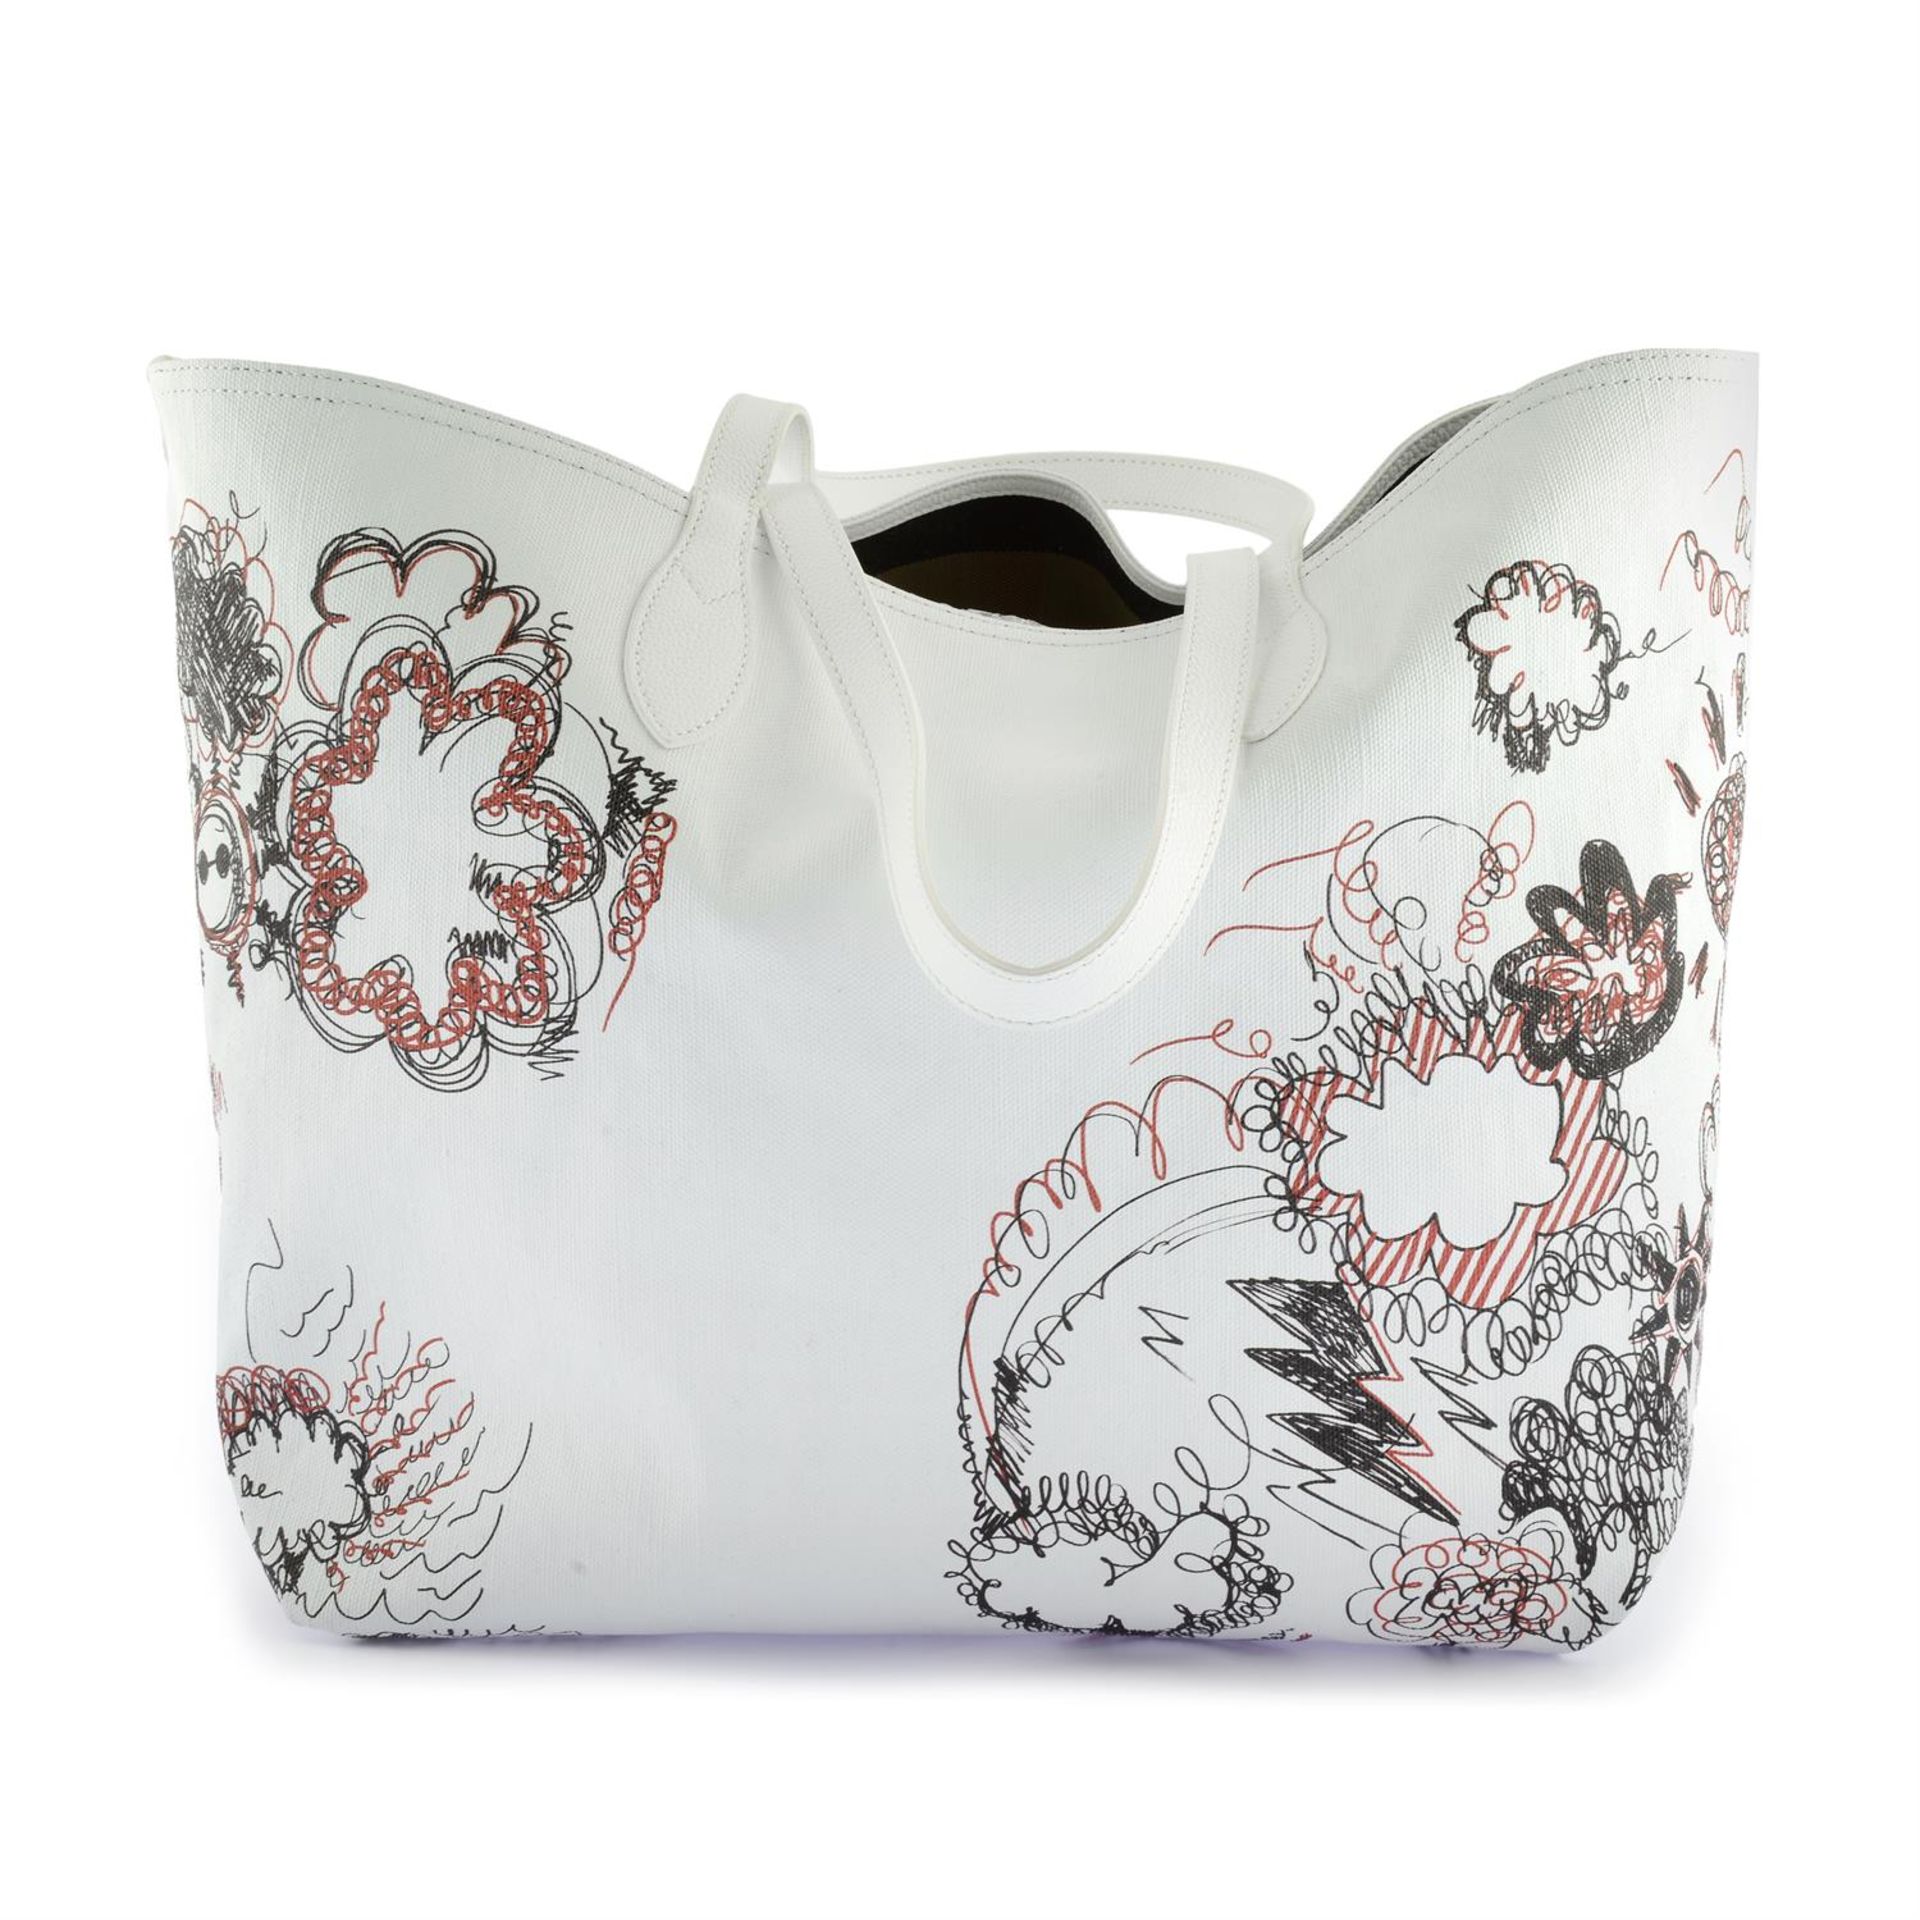 BURBERRY - a Doodle reversible shopping tote. - Image 4 of 10